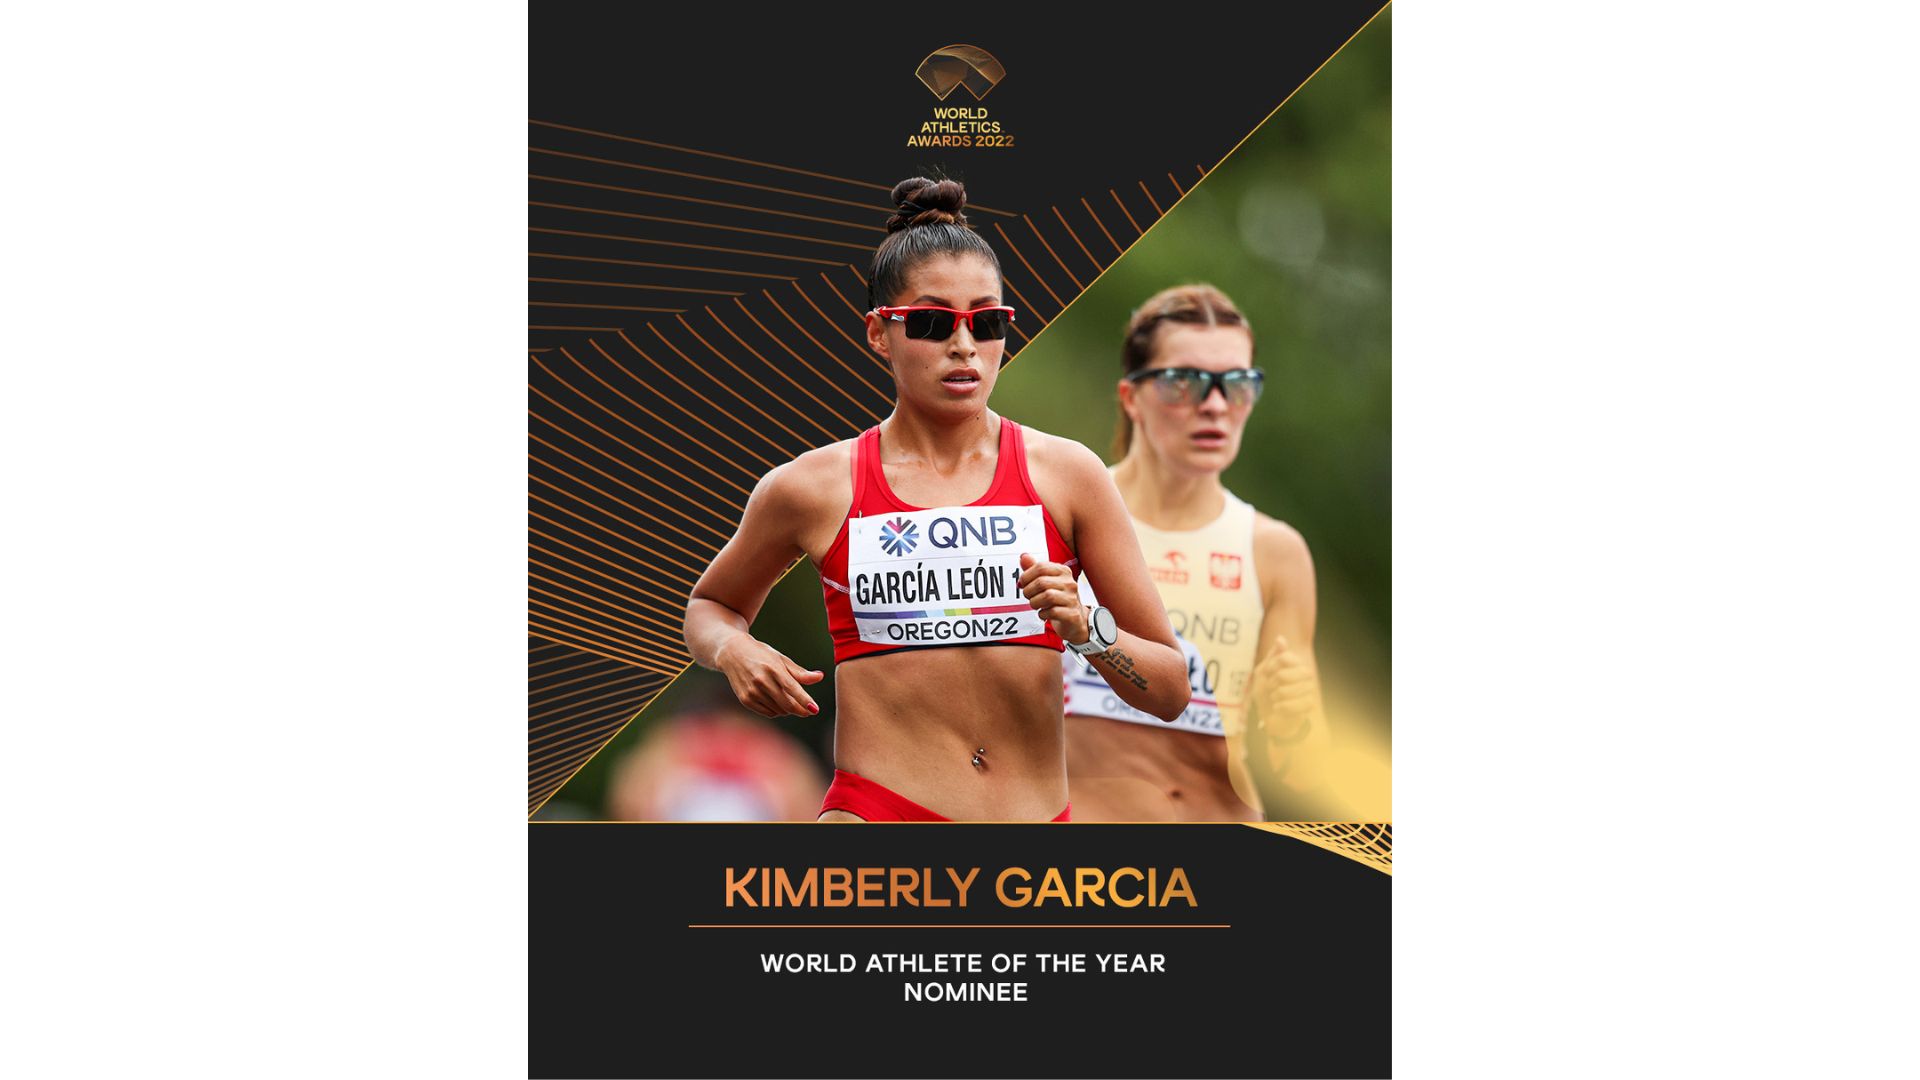 Kimberly García won two gold medals at the World Championships in Athletics held in Oregon this year.